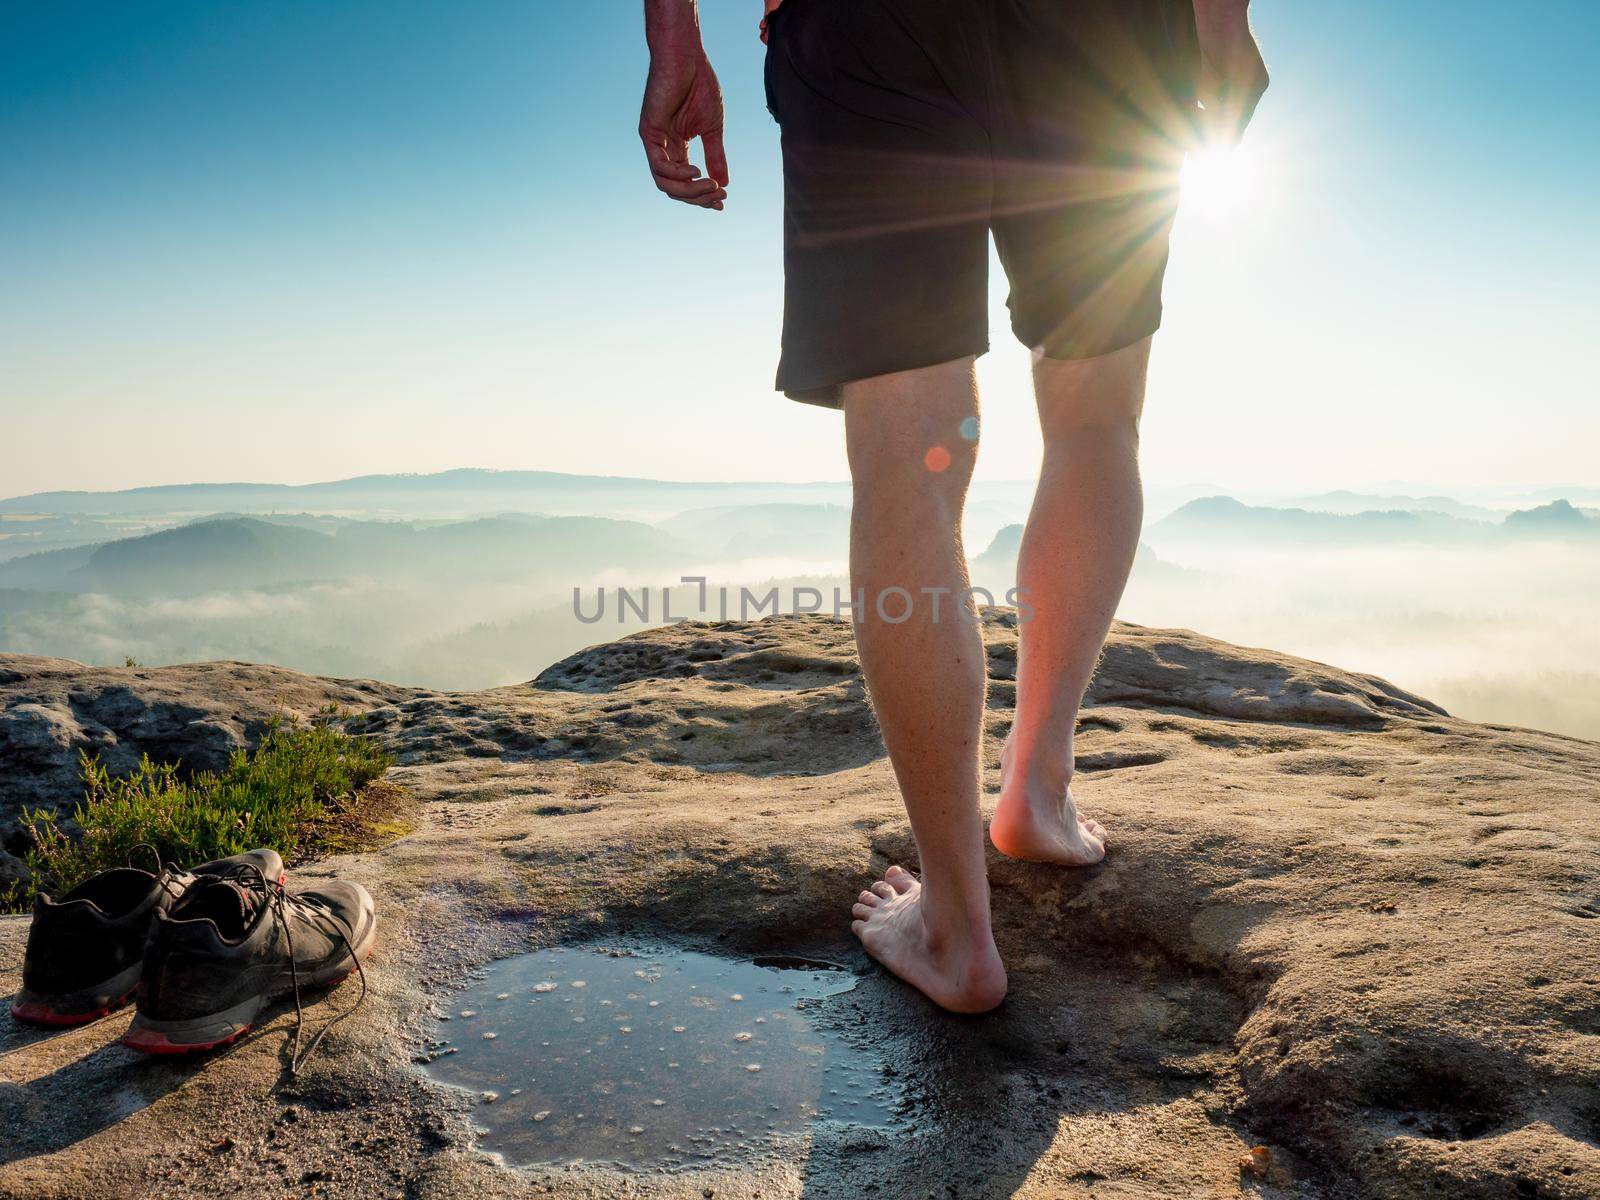 Hiker next to taken off shoes and water puddle on sandstone rock edge enjoy  view by rdonar2